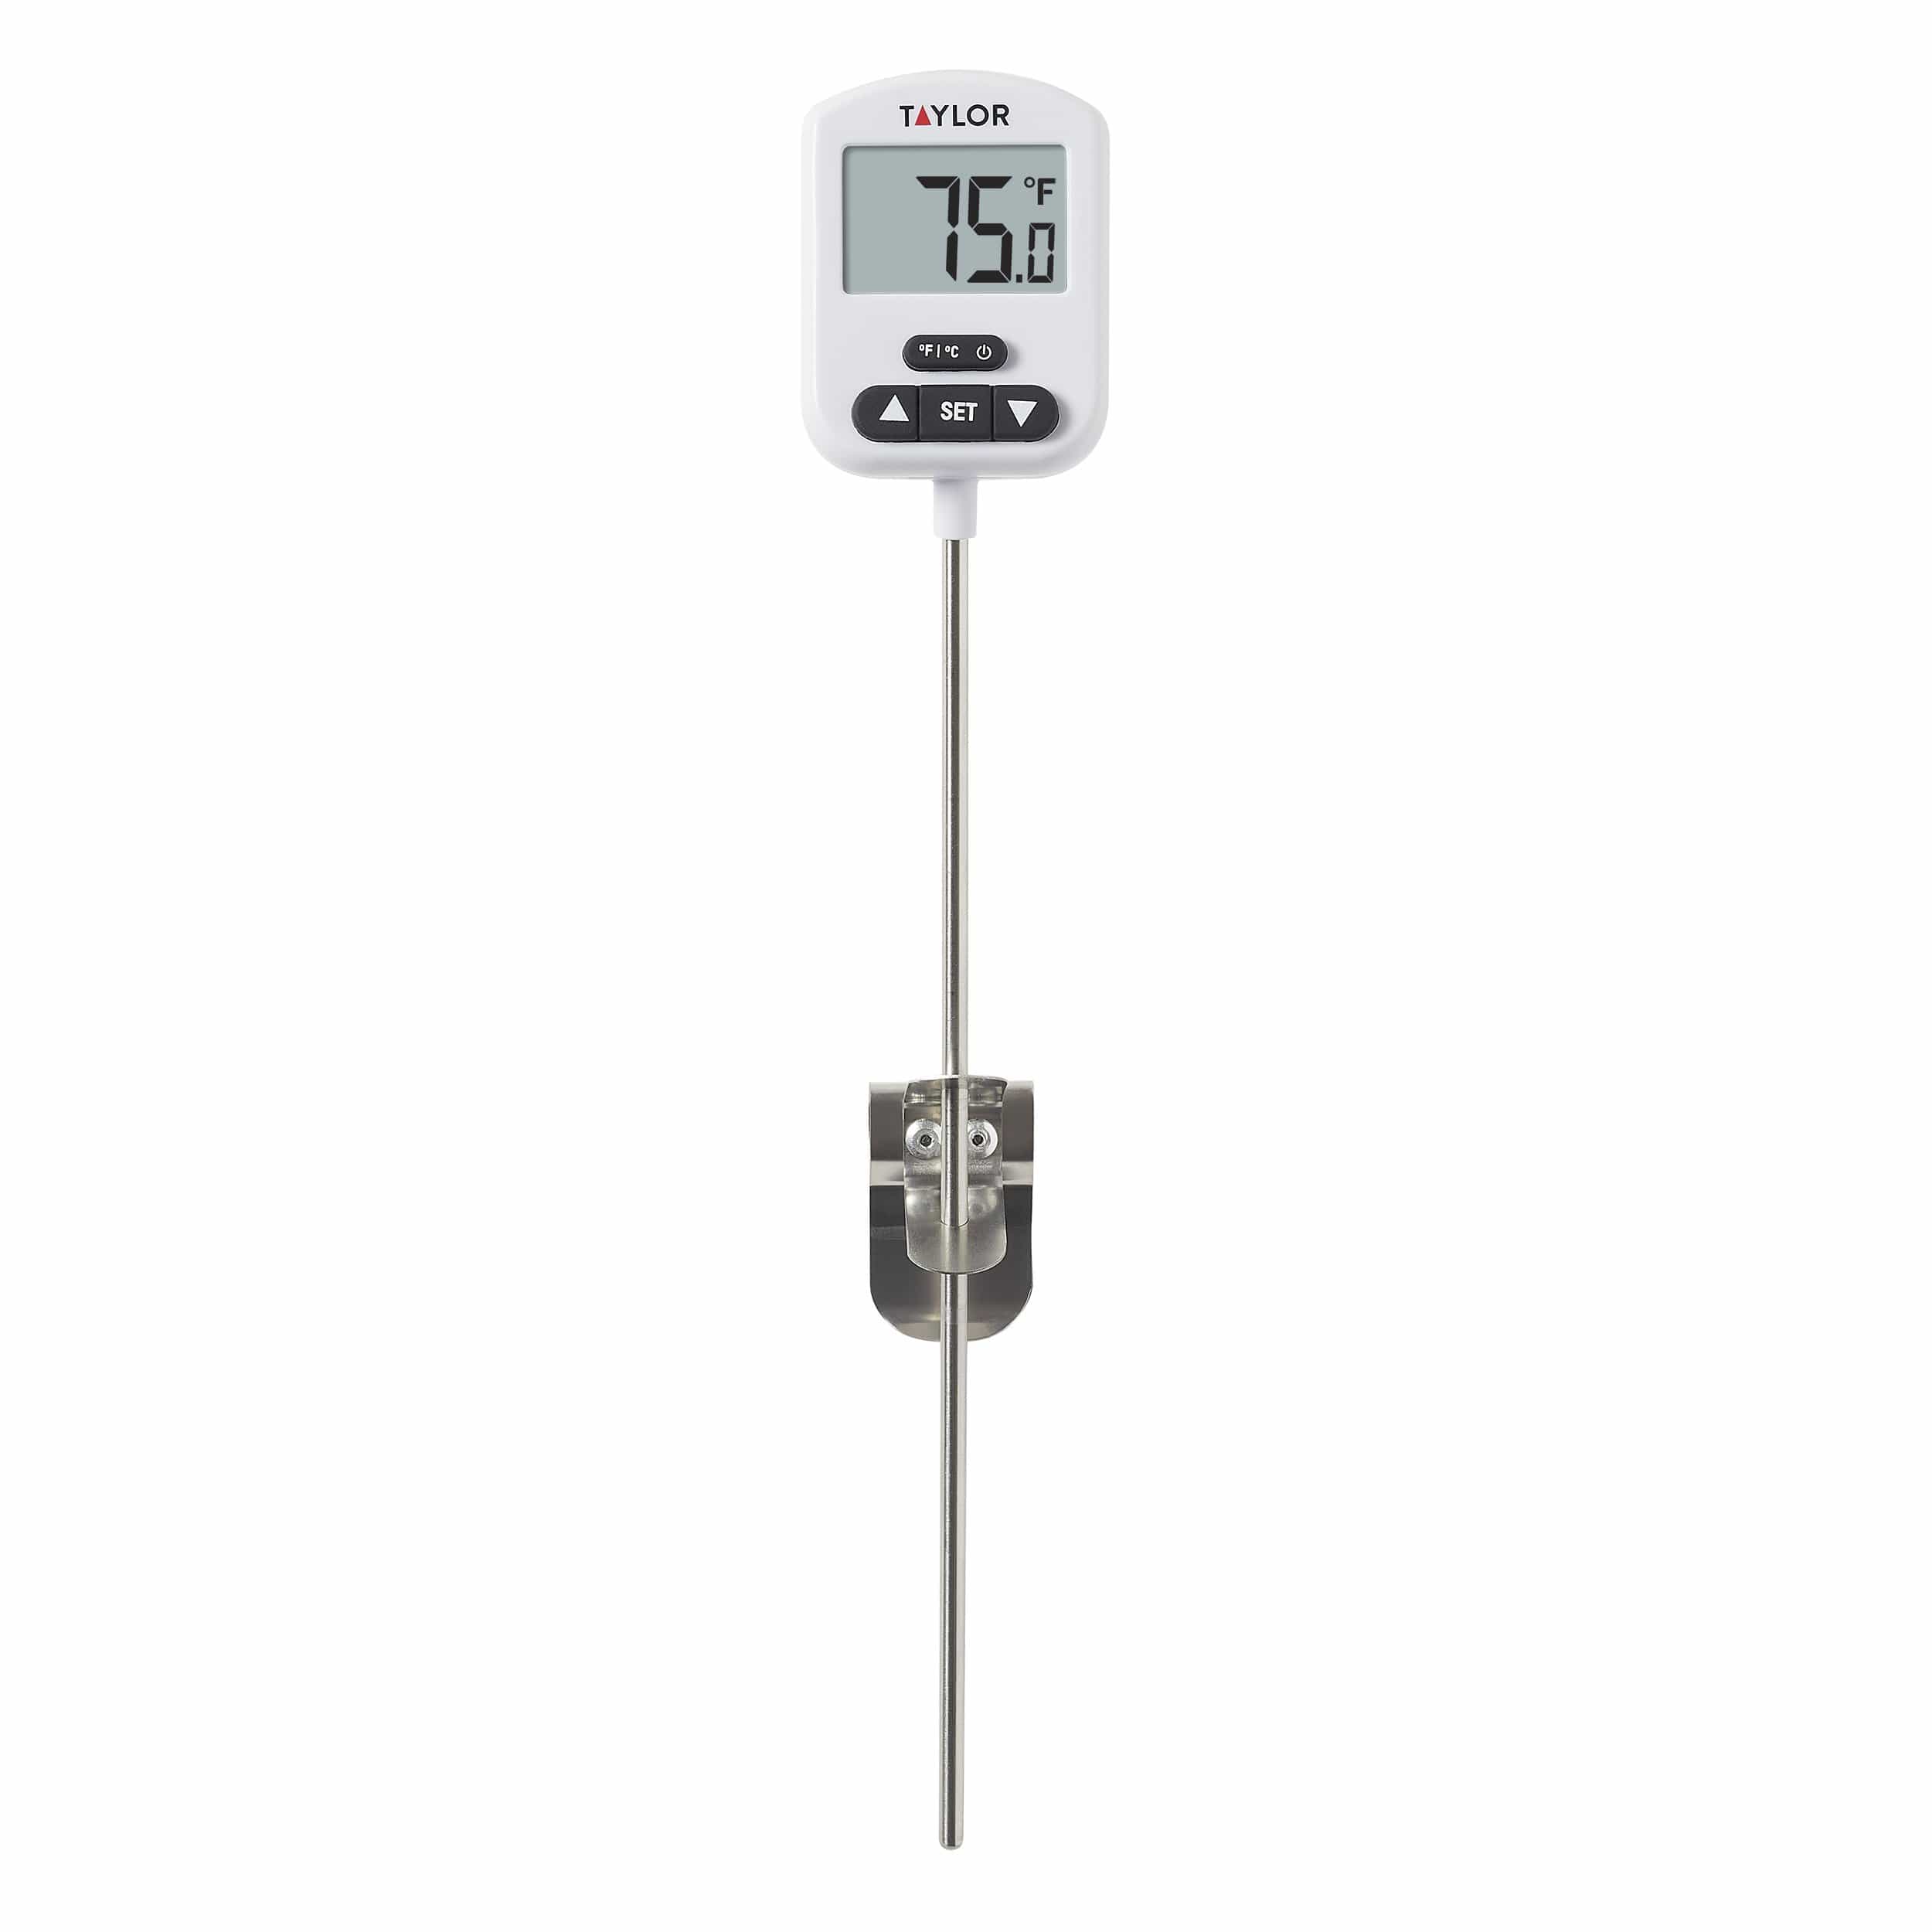 TAYLOR CANDY THERMOMETER in F & C with metal clip attached. JAPAN